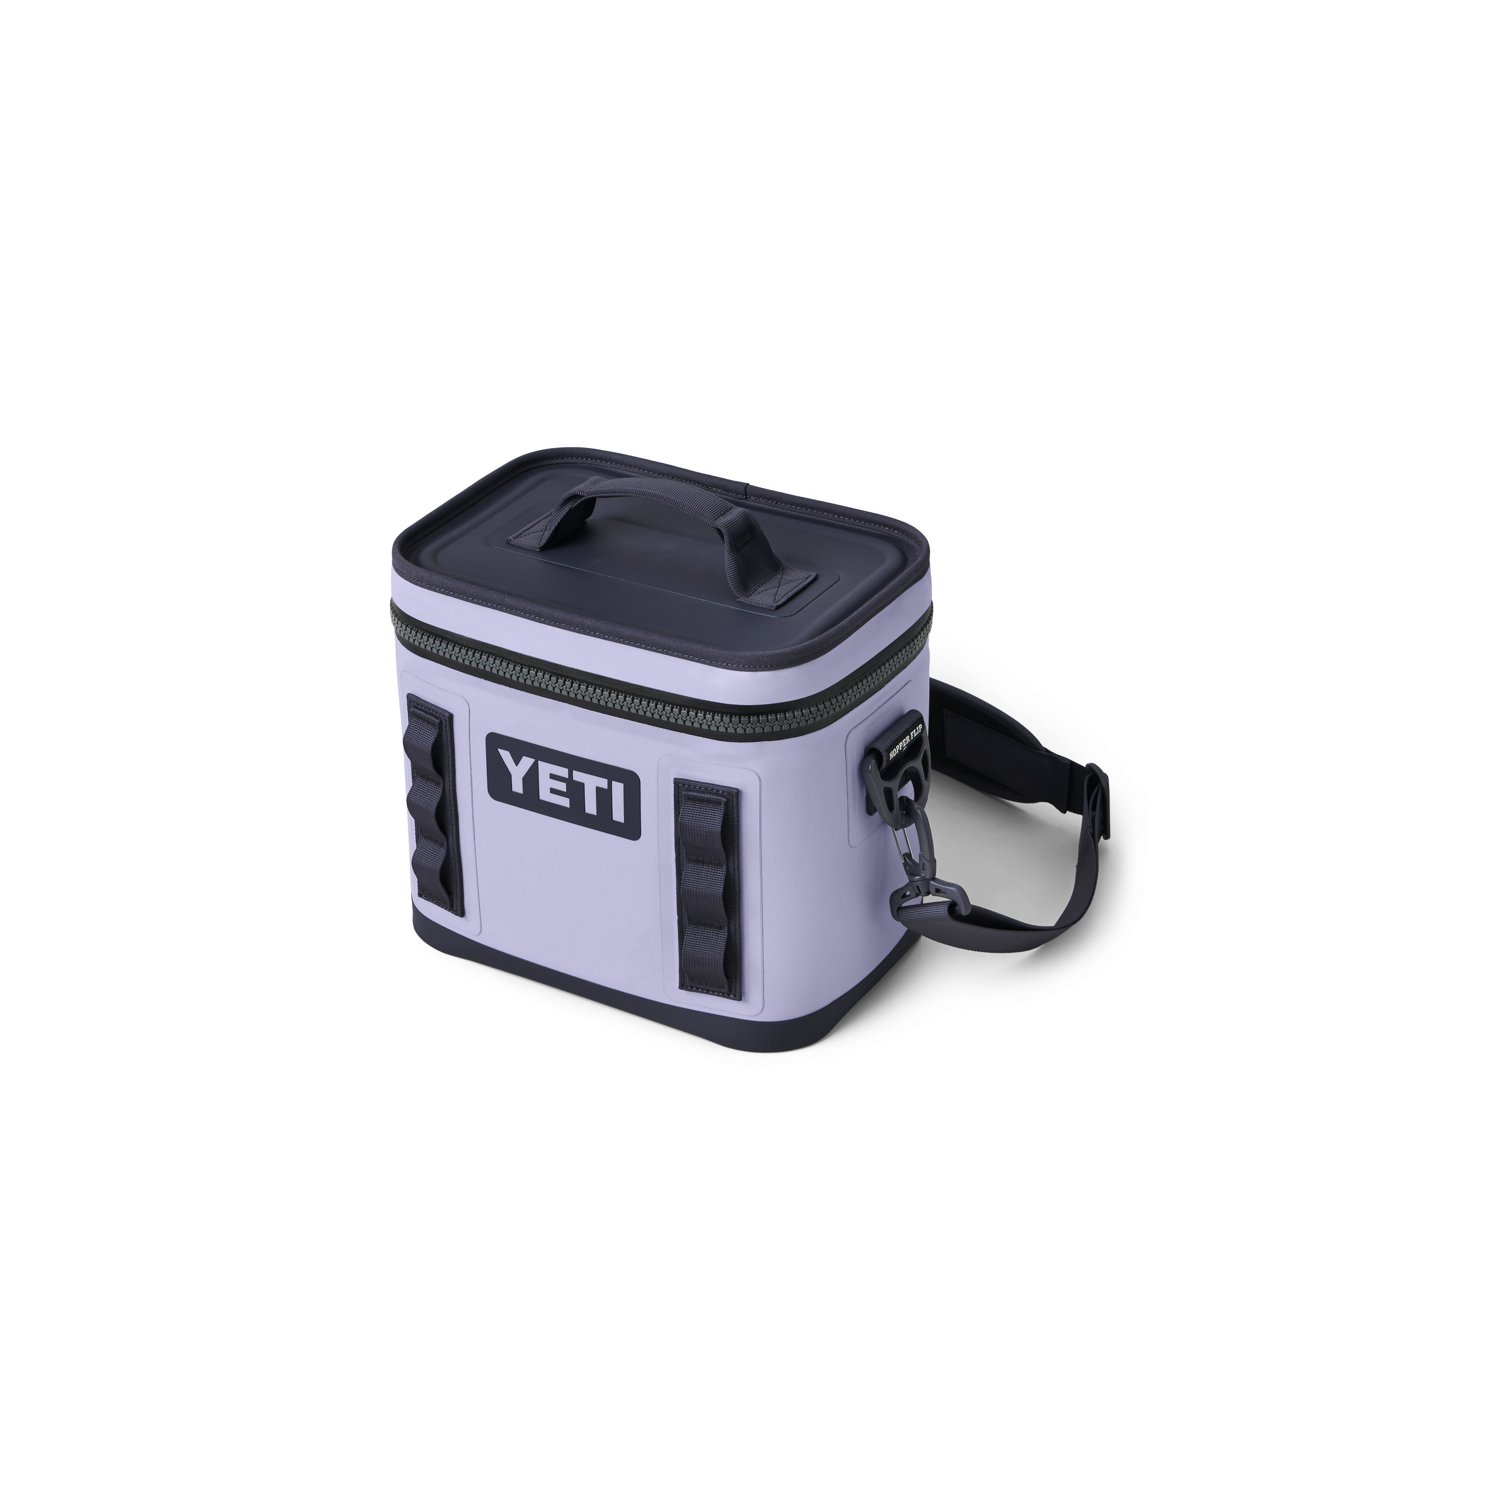 https://academy.scene7.com/is/image/academy//coolers/yeti-hopper-flip-8-soft-cooler-18060131200-purple/0410ec654d484bc891aac84eee6860e5?$pdp-mobile-gallery-ng$